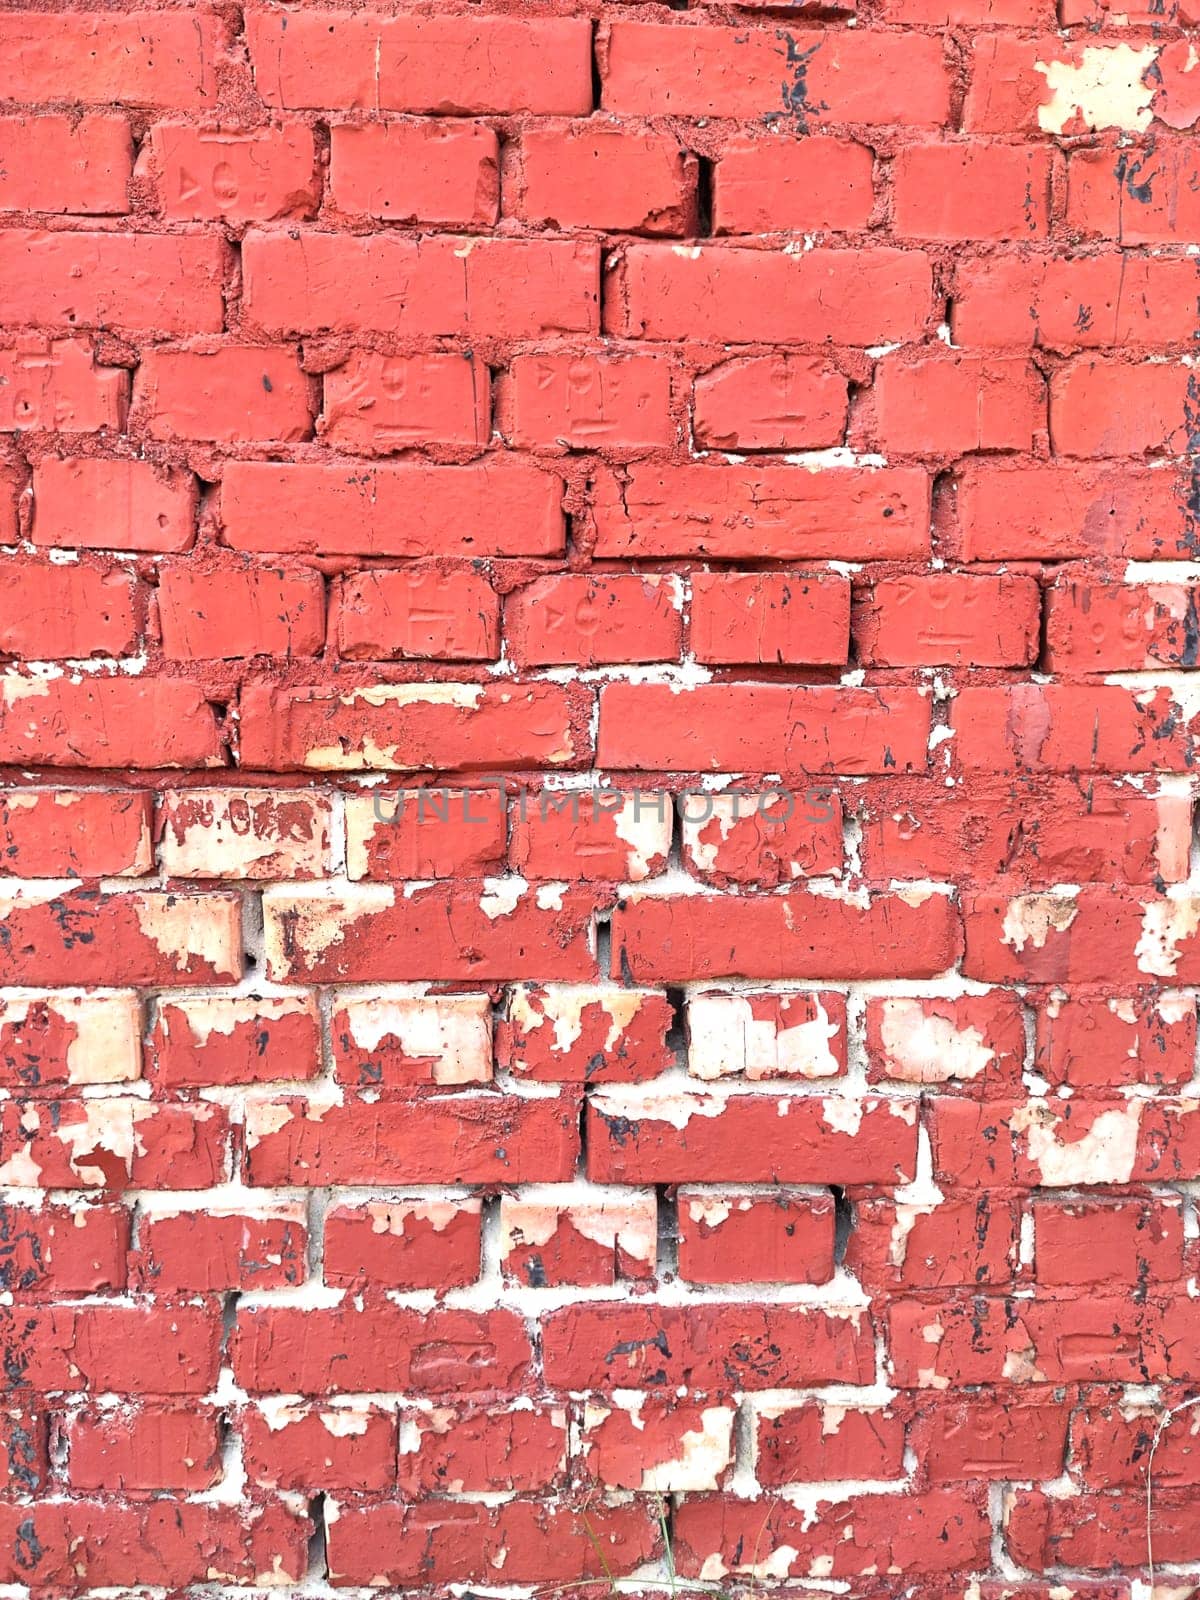 Colorful red brick wall on the house. Texture of red stone blocks, close up. Background. Old building. 48 megapixels